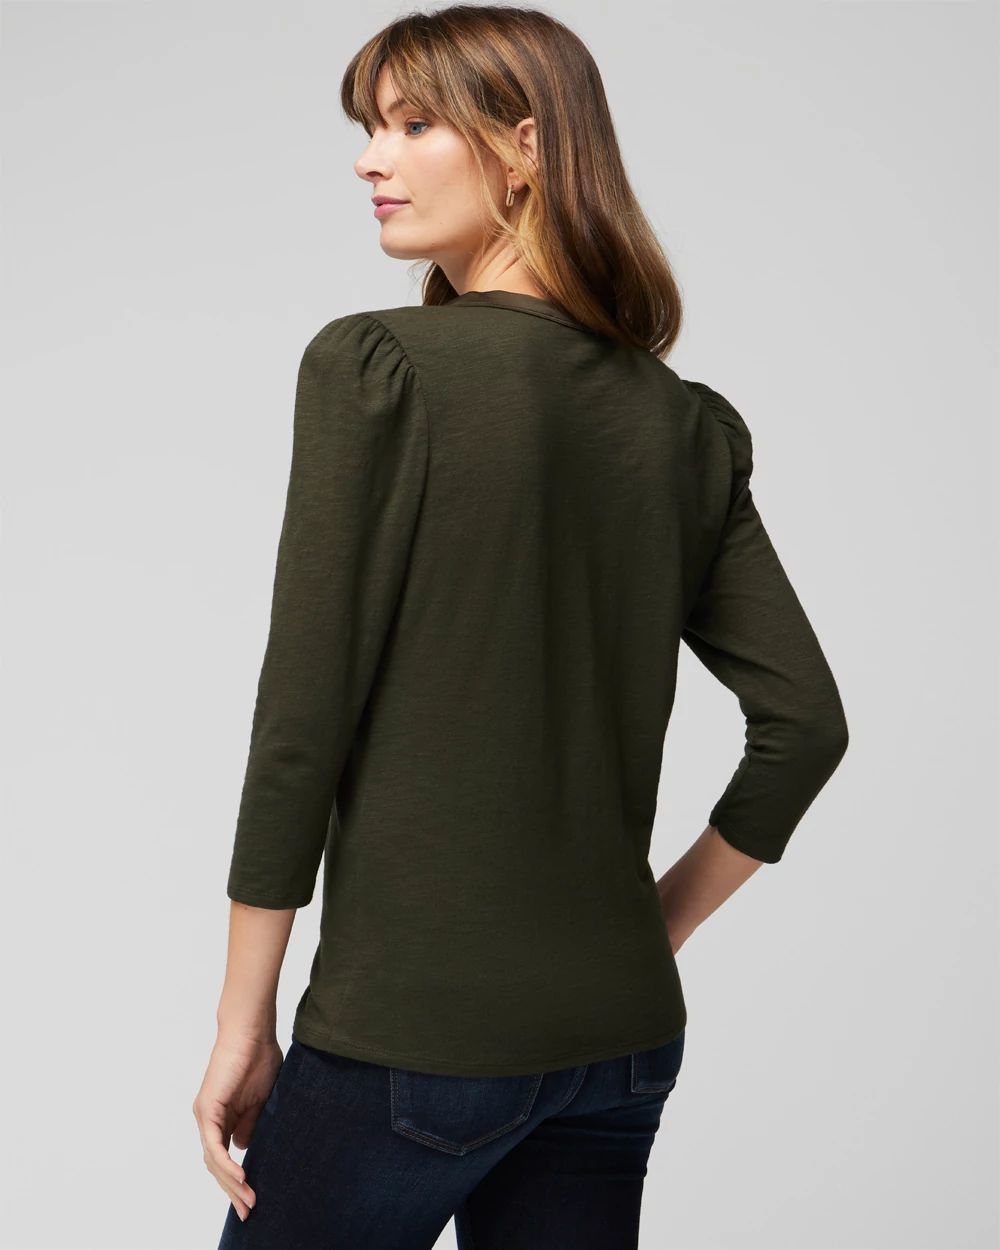 3/4 Sleeve Henley Tee click to view larger image.